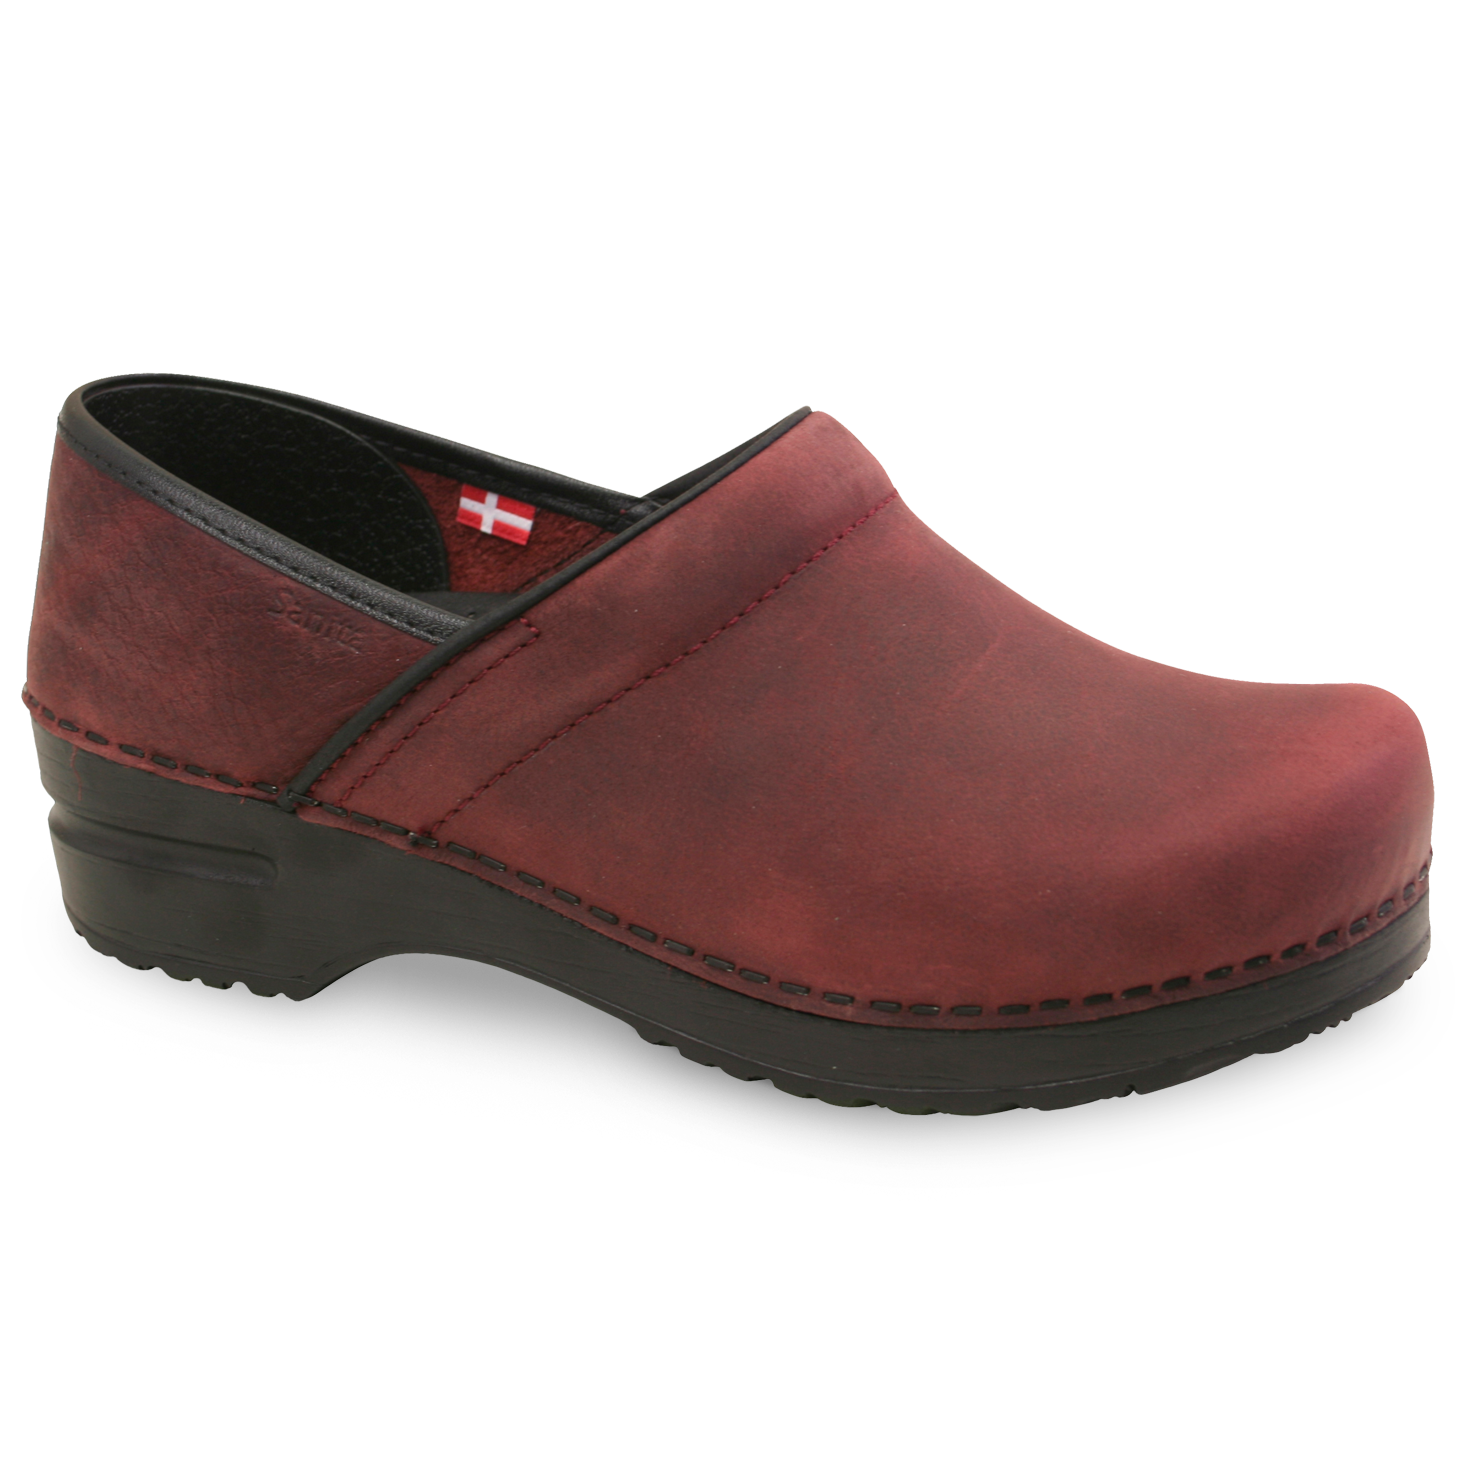 Pro. Oiled Leather Women's - Port - Second